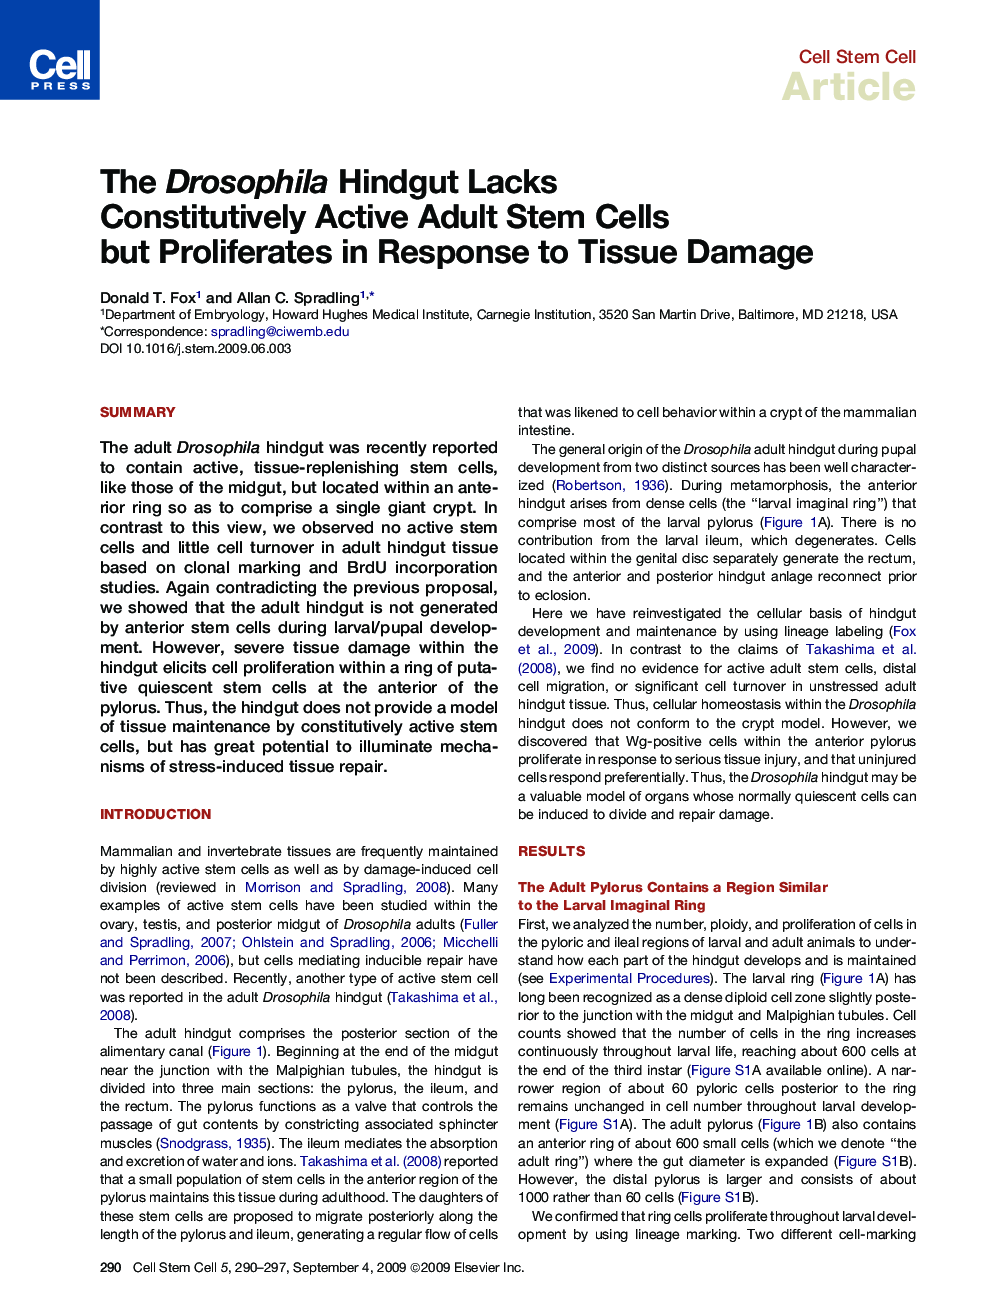 The Drosophila Hindgut Lacks Constitutively Active Adult Stem Cells but Proliferates in Response to Tissue Damage